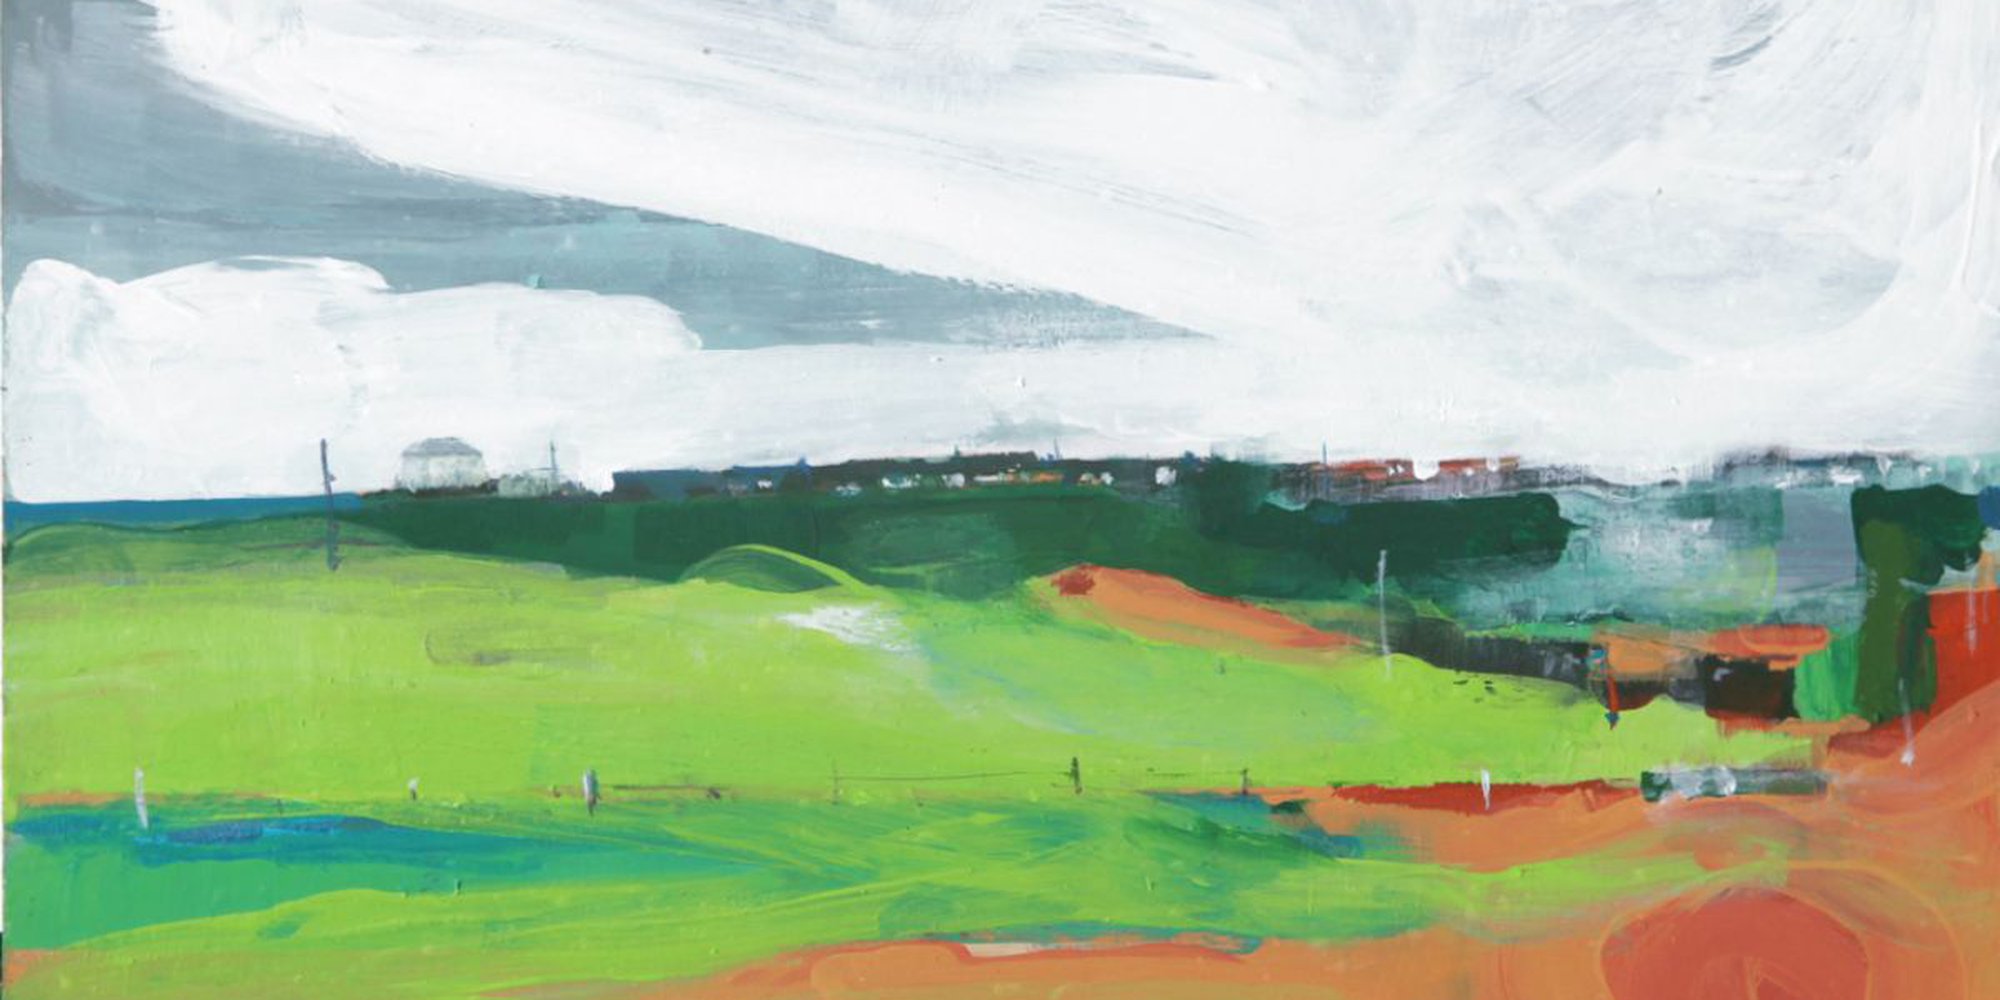 Art of the Day: "Over the dunes to Amble, 2014" by Paul West